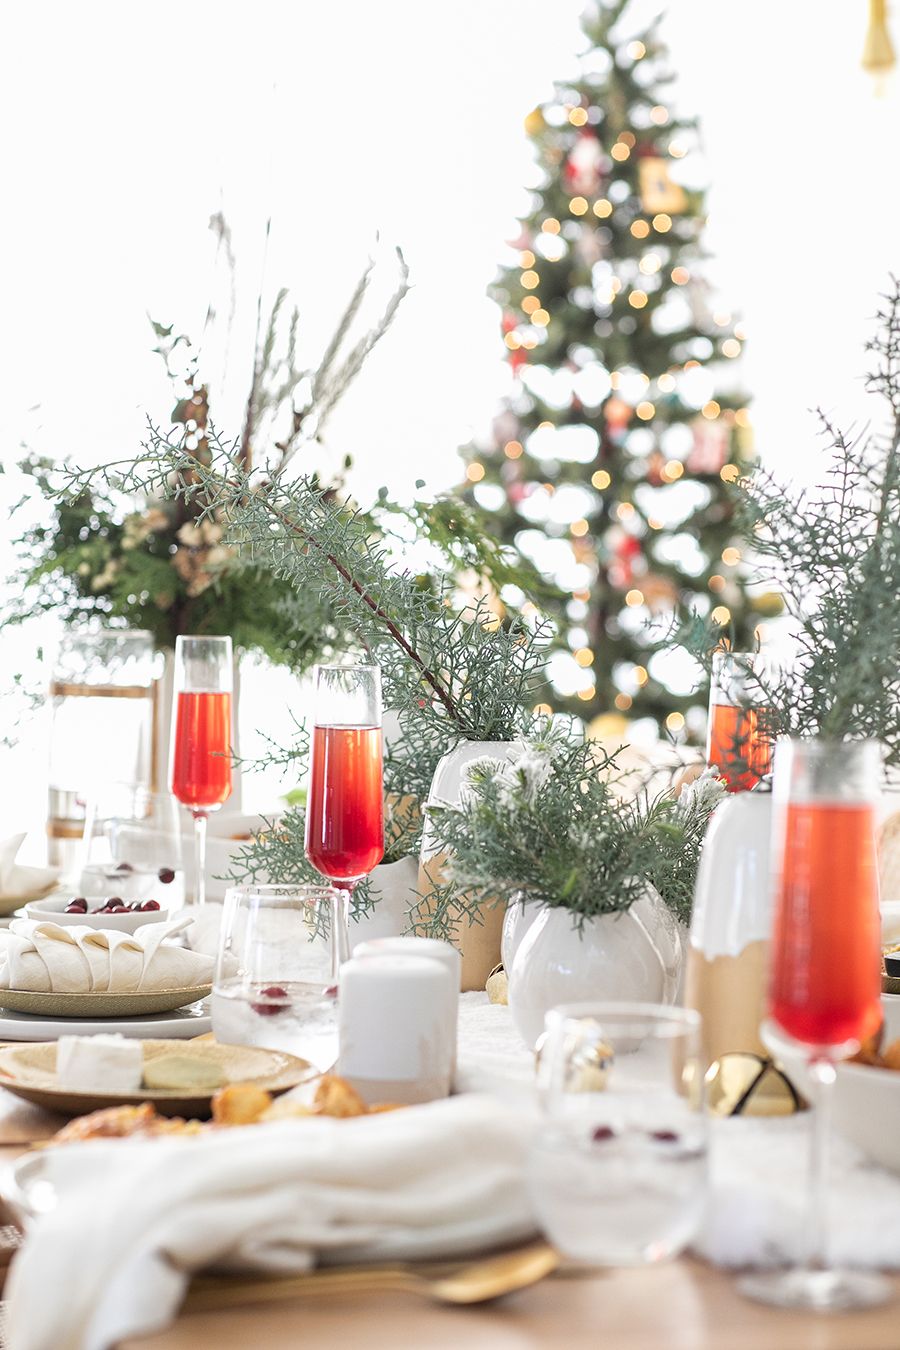 50 Best Christmas Table Decorations 2022 - Christmas Centerpieces